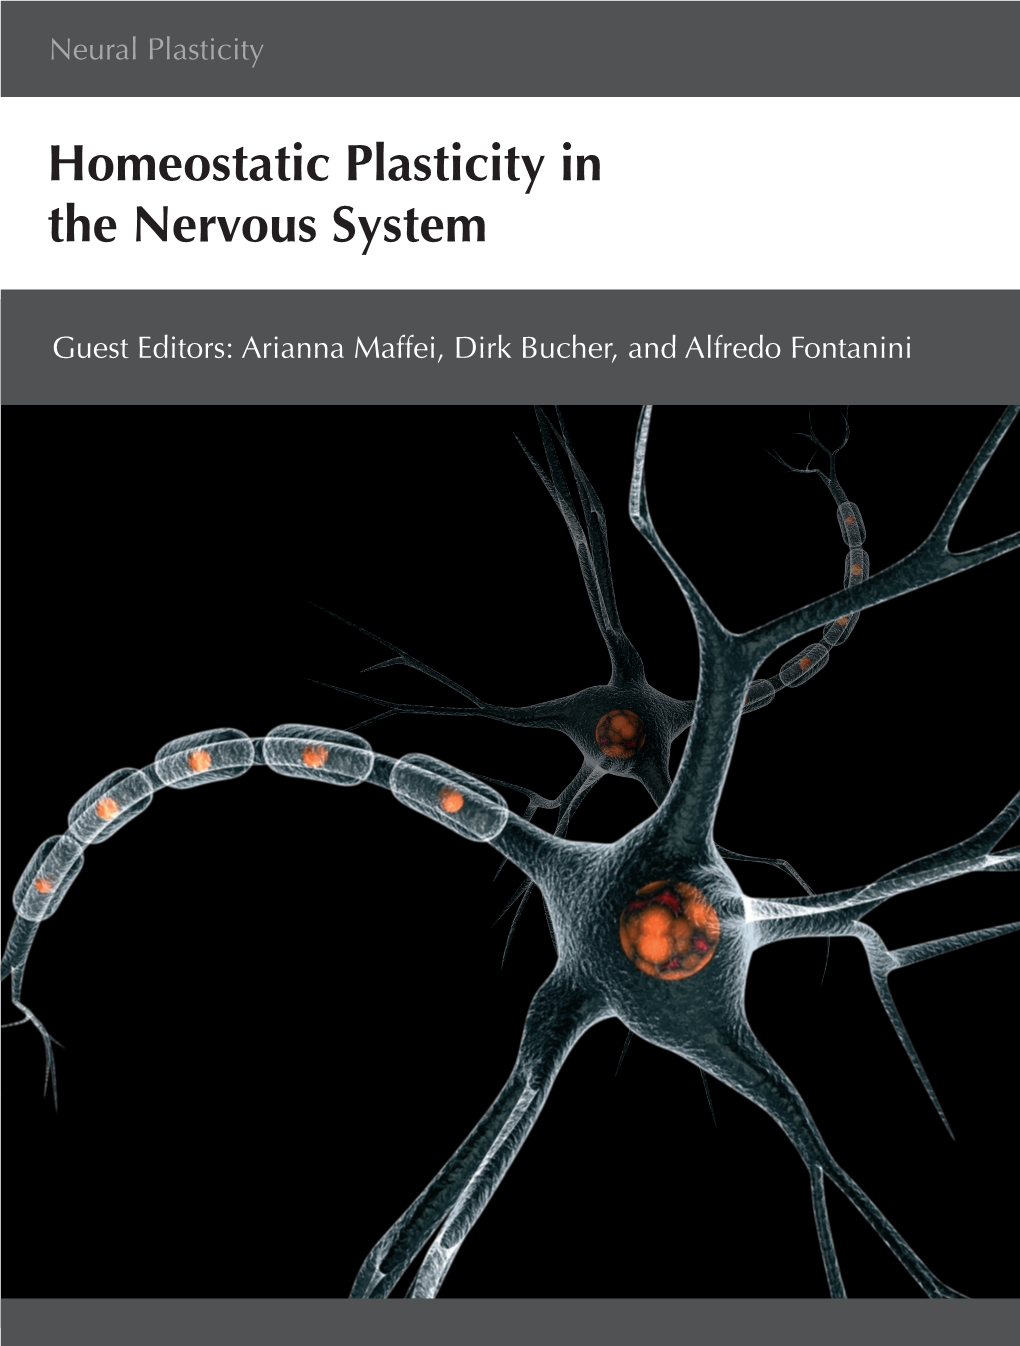 Homeostatic Plasticity in the Nervous System